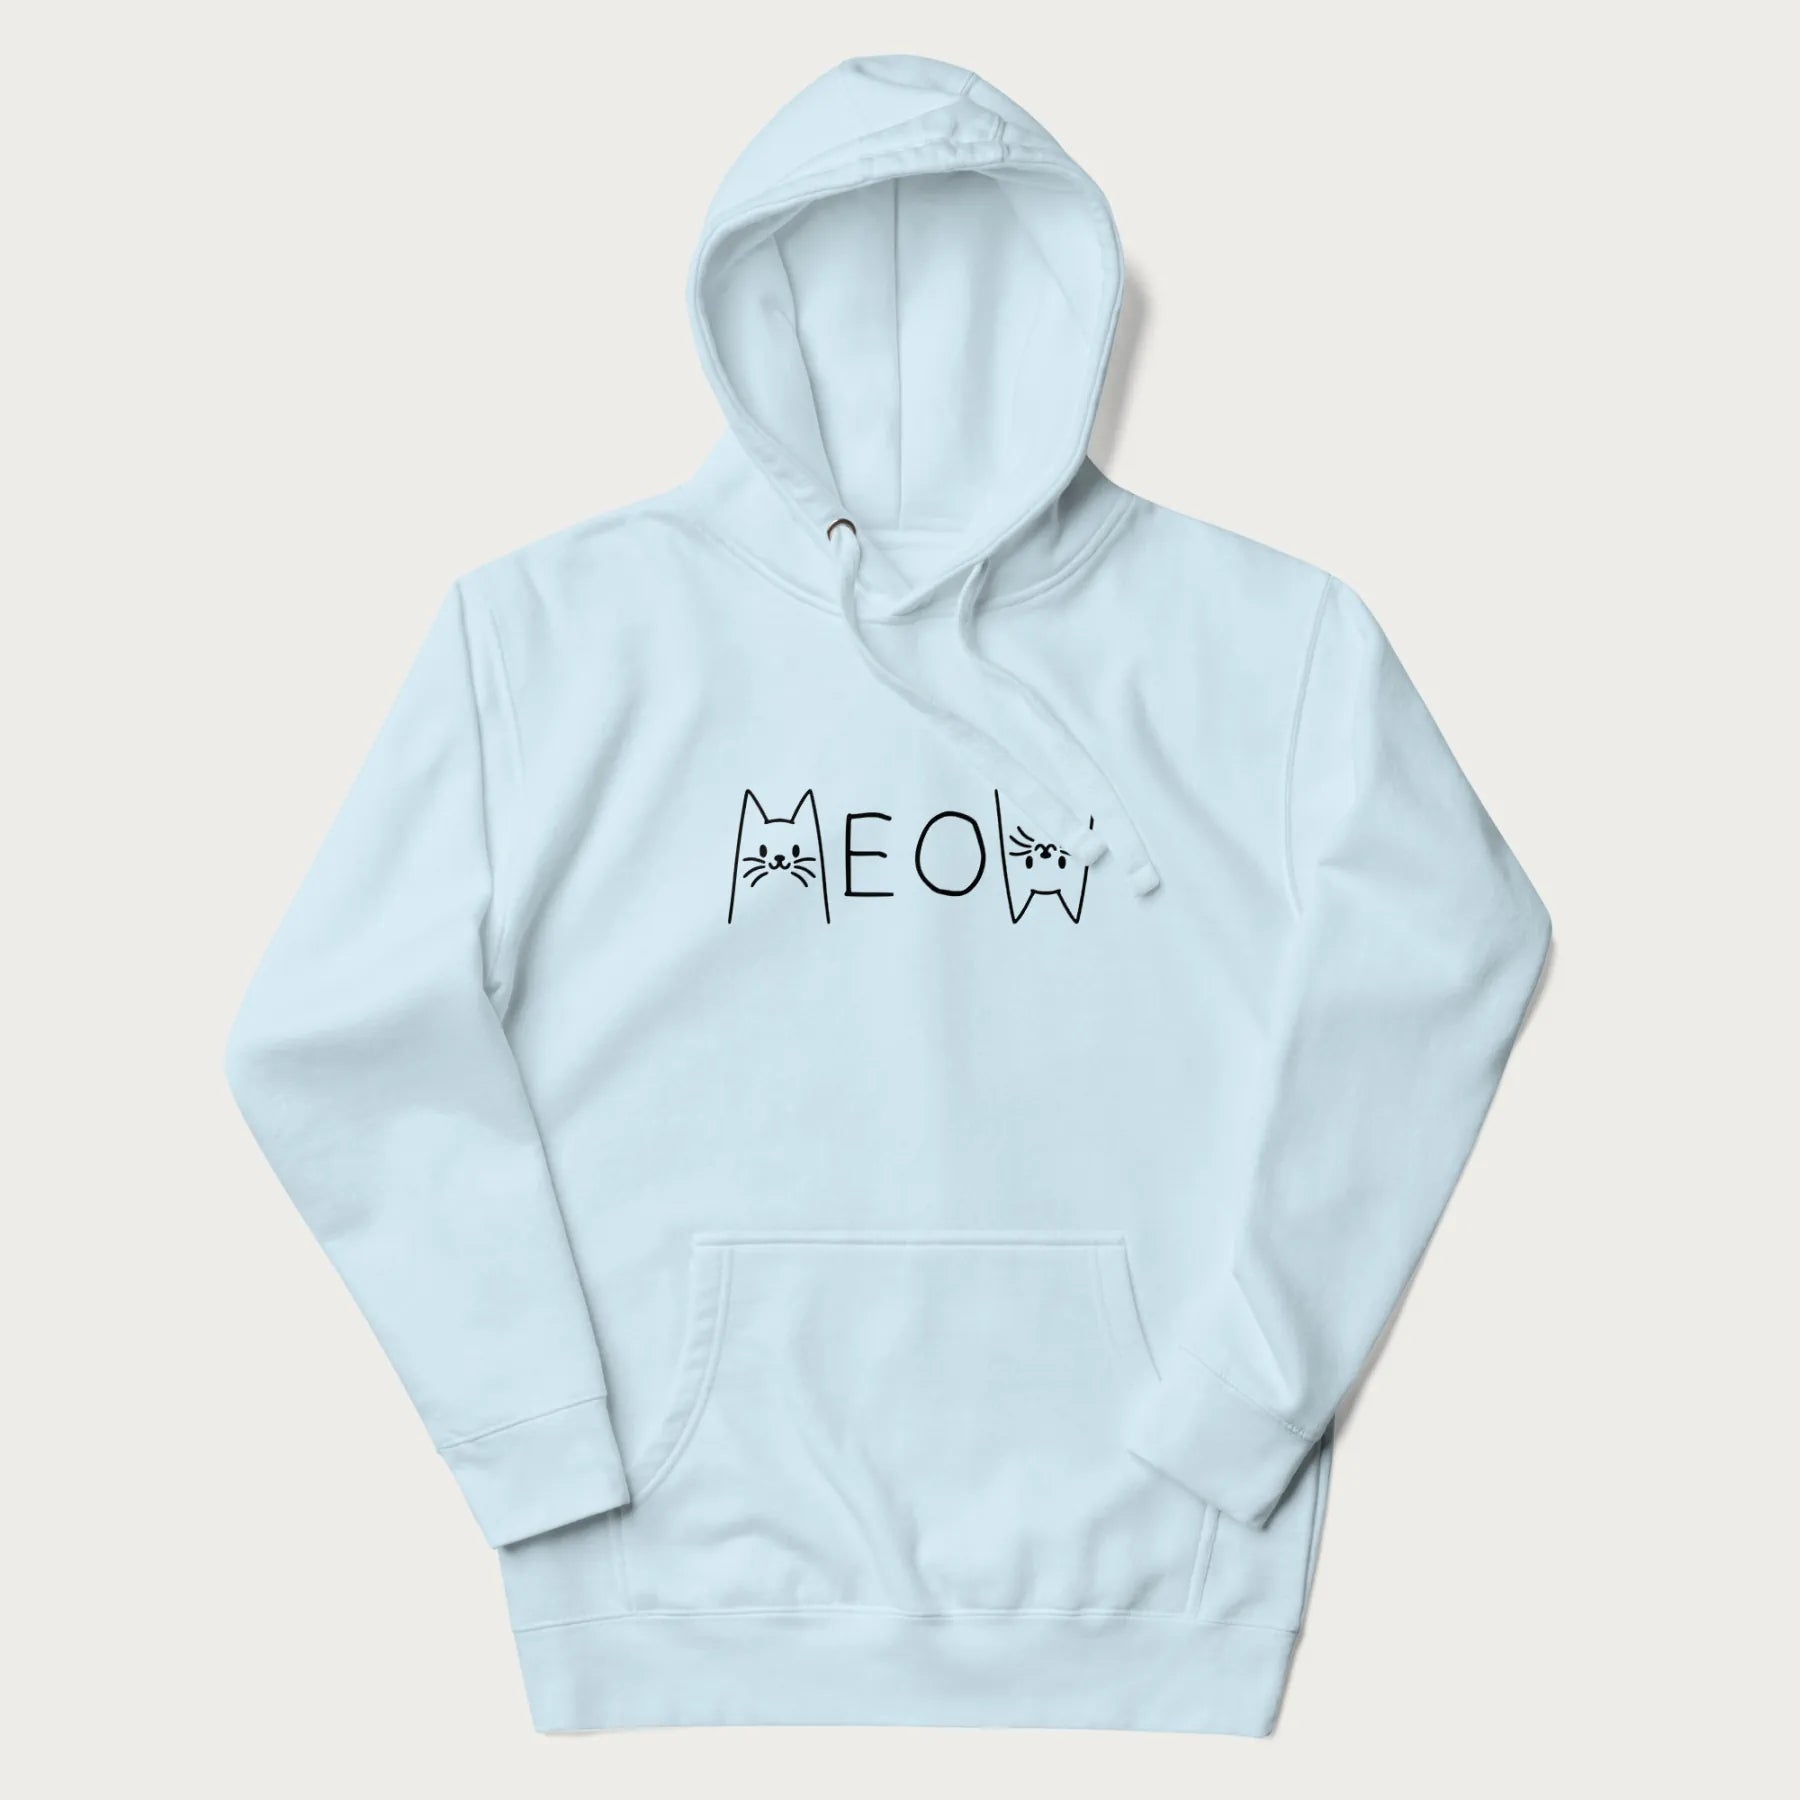 Light blue meow hoodie with a simple 'MEOW' text and cute cat face graphics on the front.